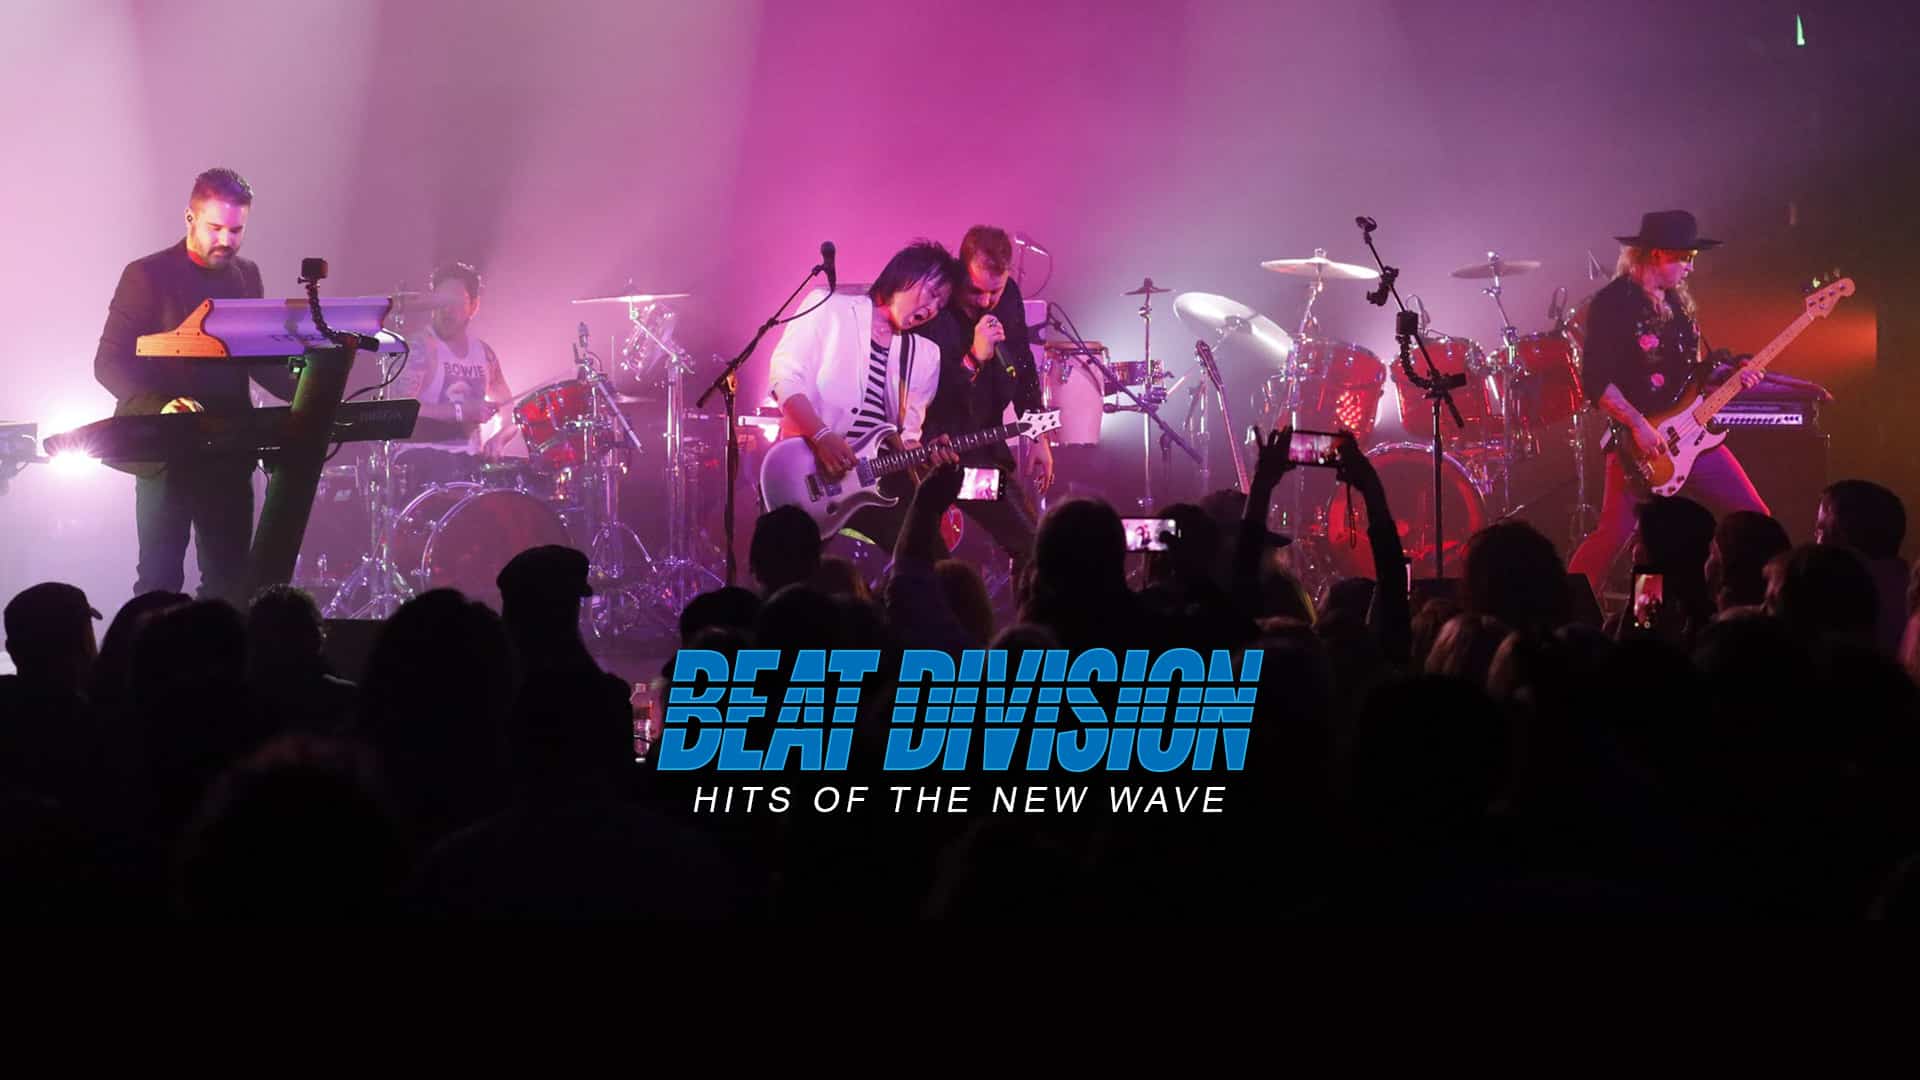 Beat Division - Hits Of The New Wave - J-Fell Presents